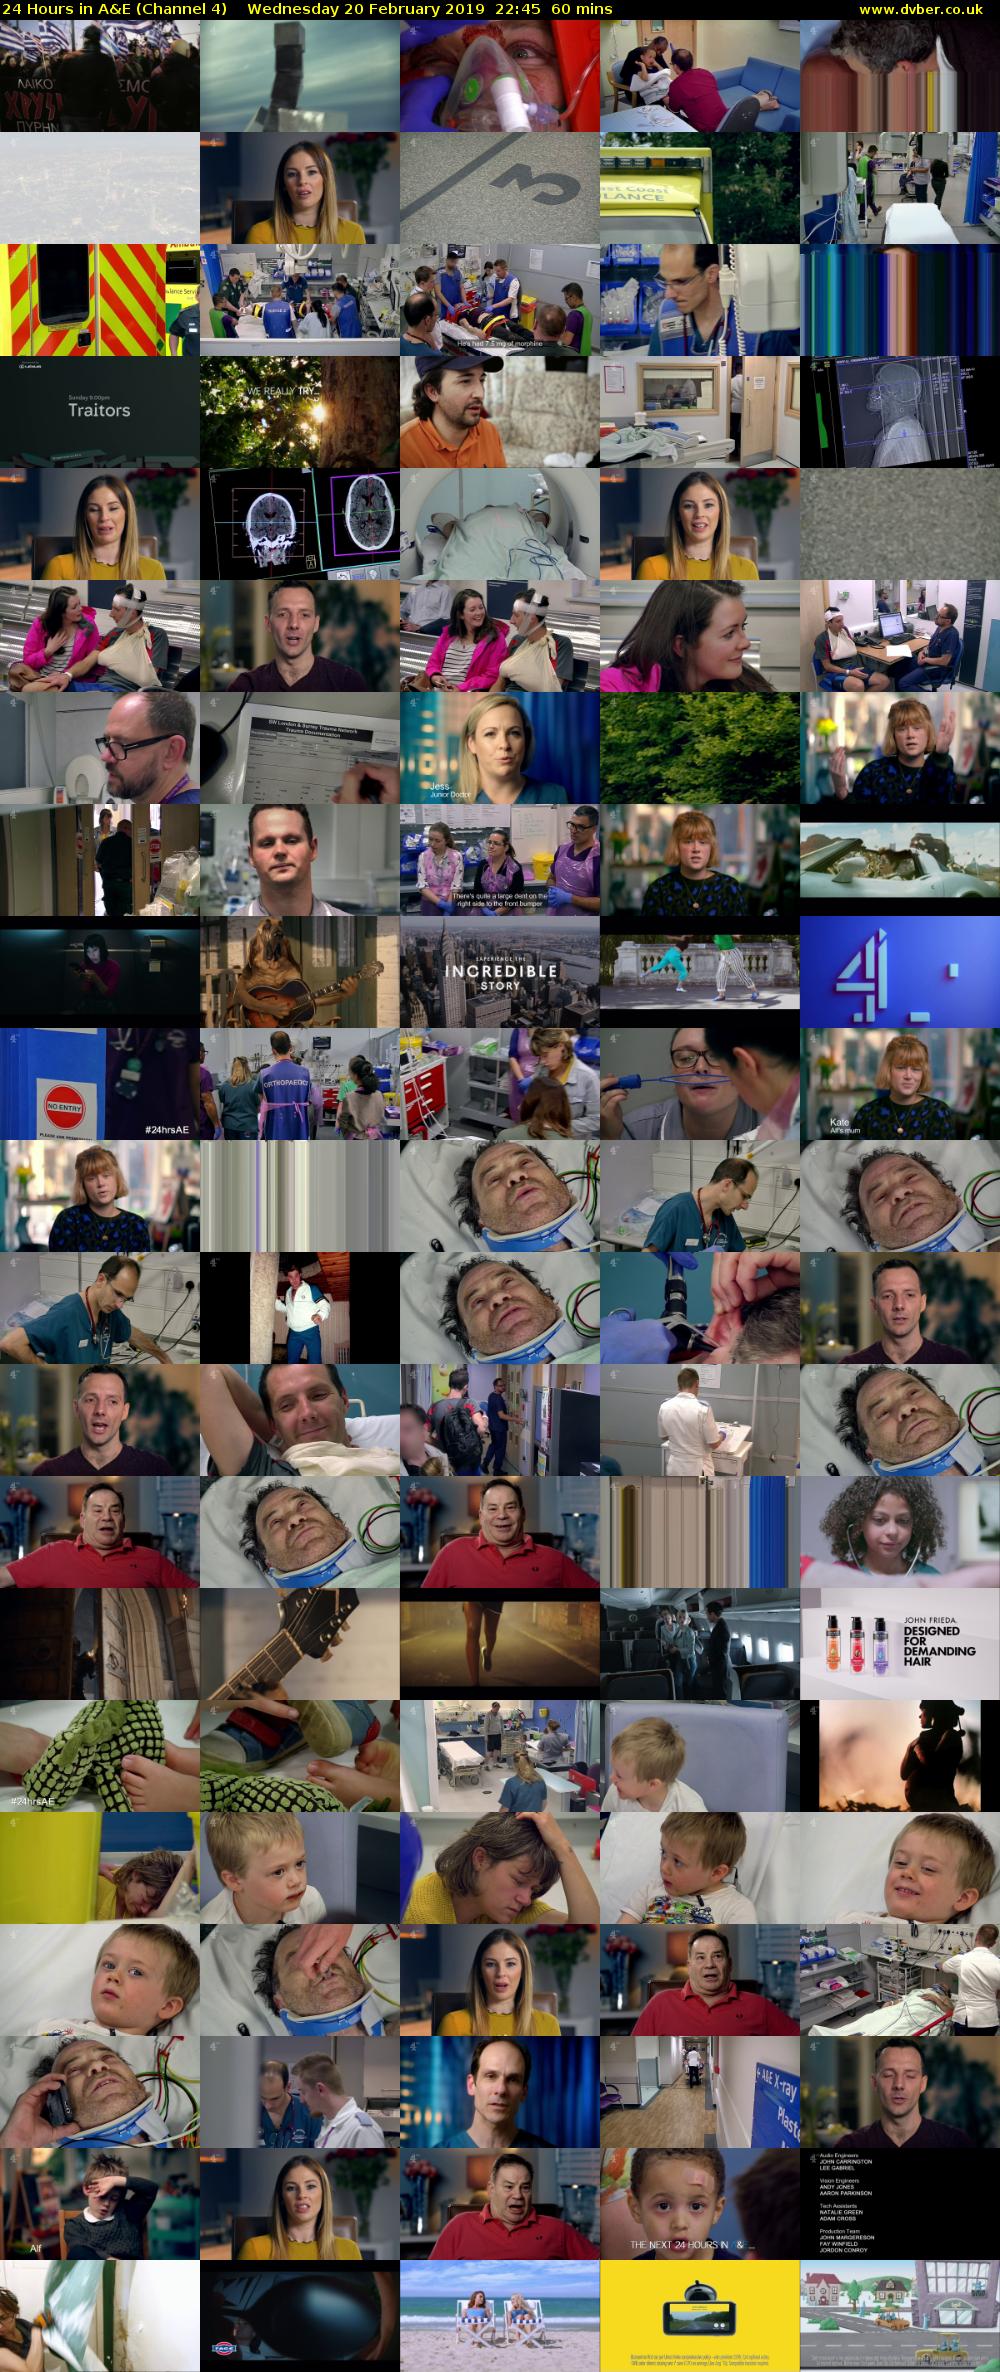 24 Hours in A&E (Channel 4) Wednesday 20 February 2019 22:45 - 23:45